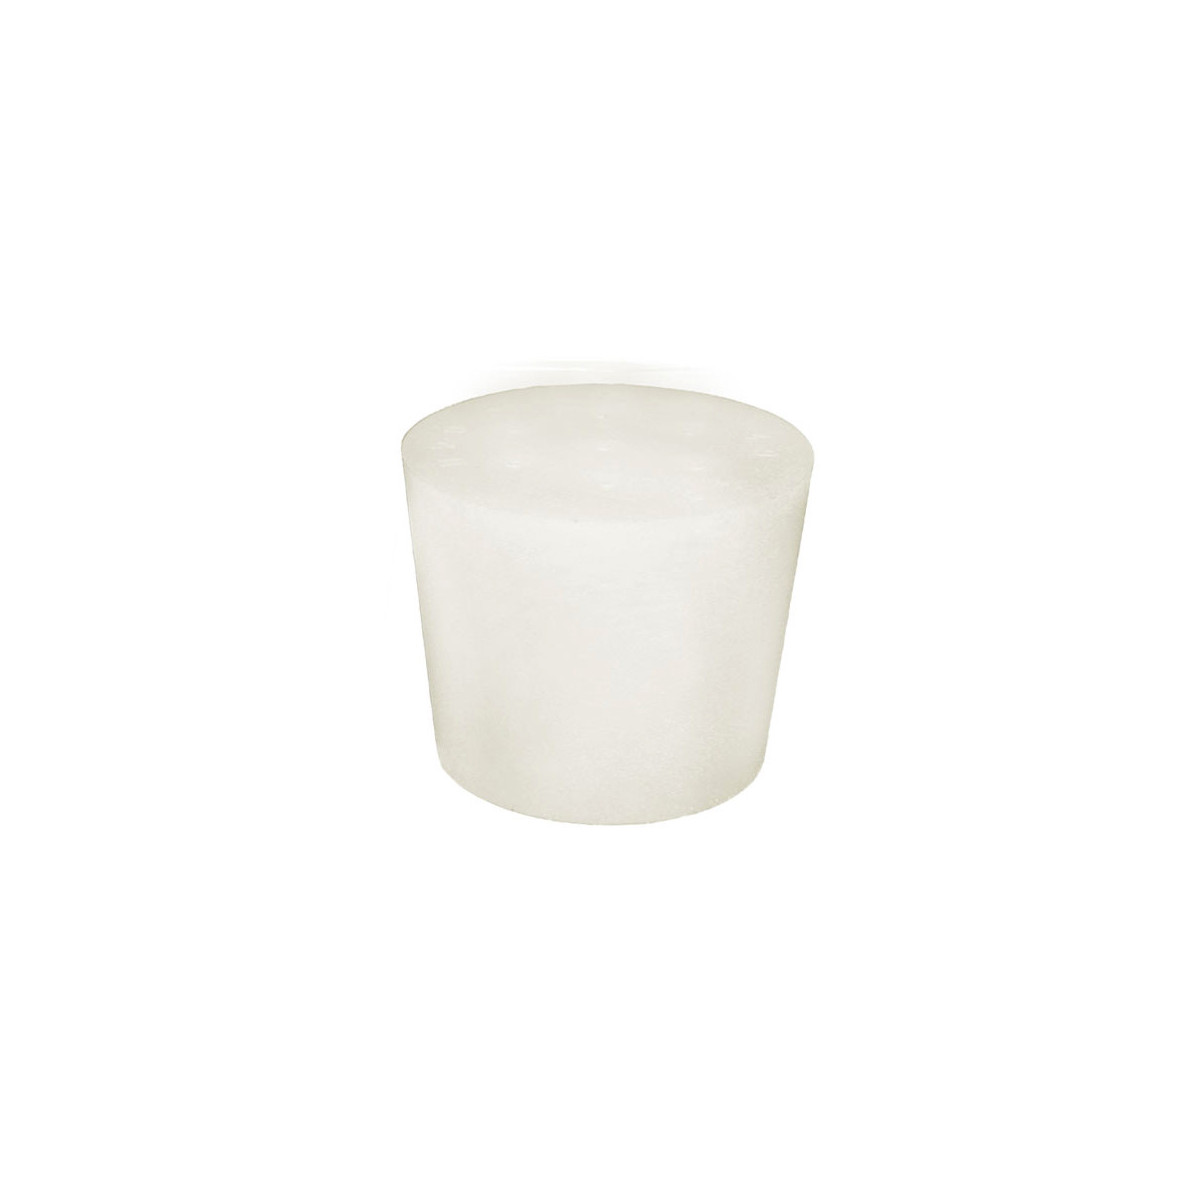 silicone bung 36/44 mm - without hole